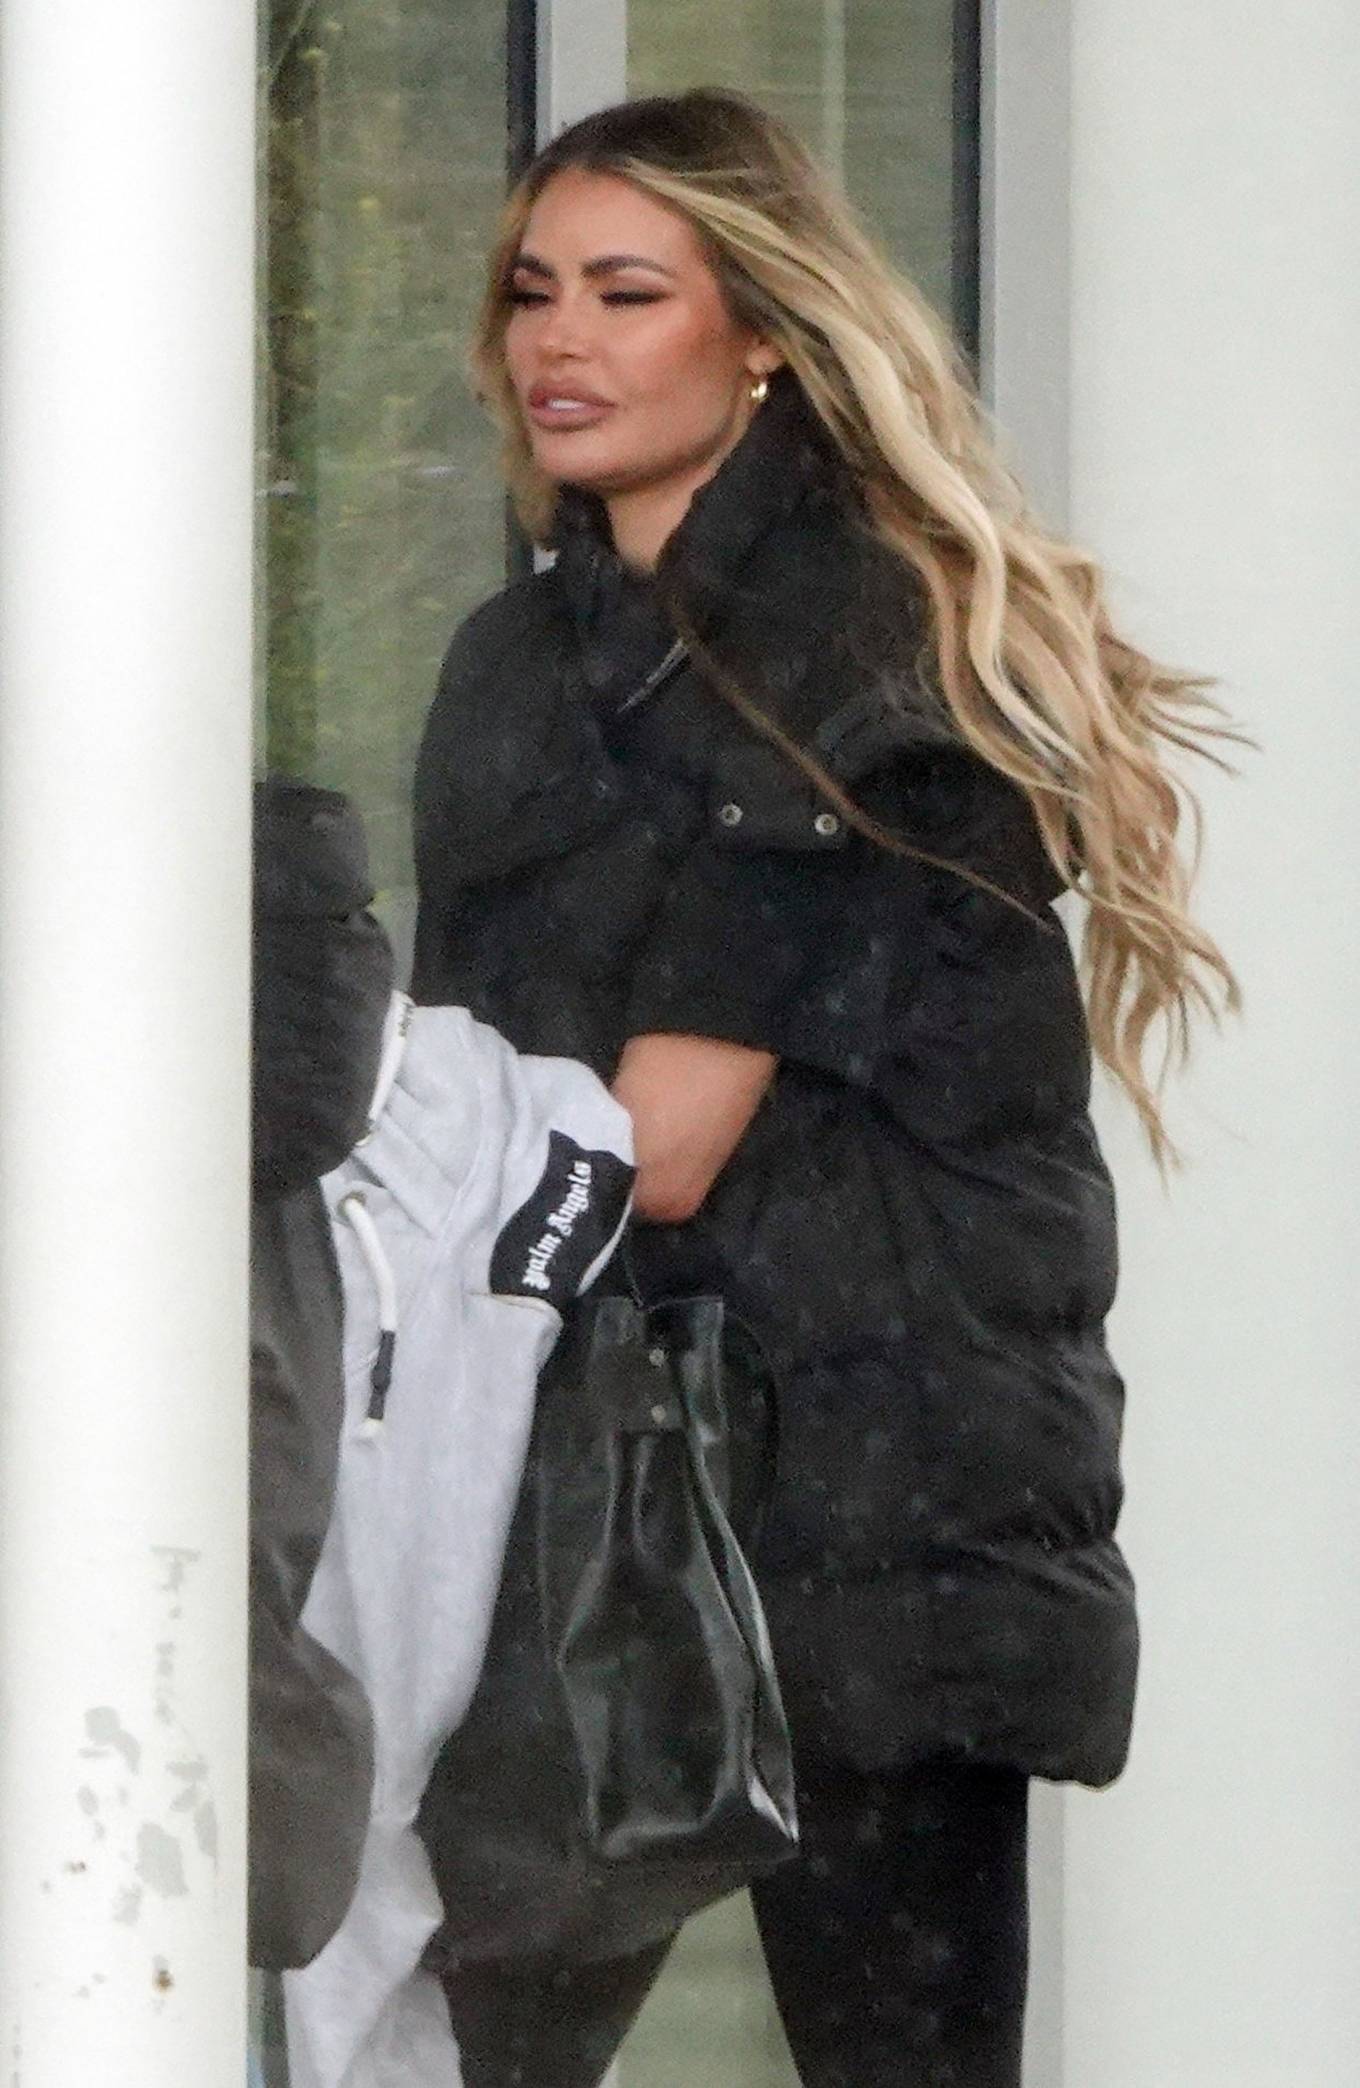 Chloe Sims - Arrive at the Slough Ice Arena for practice